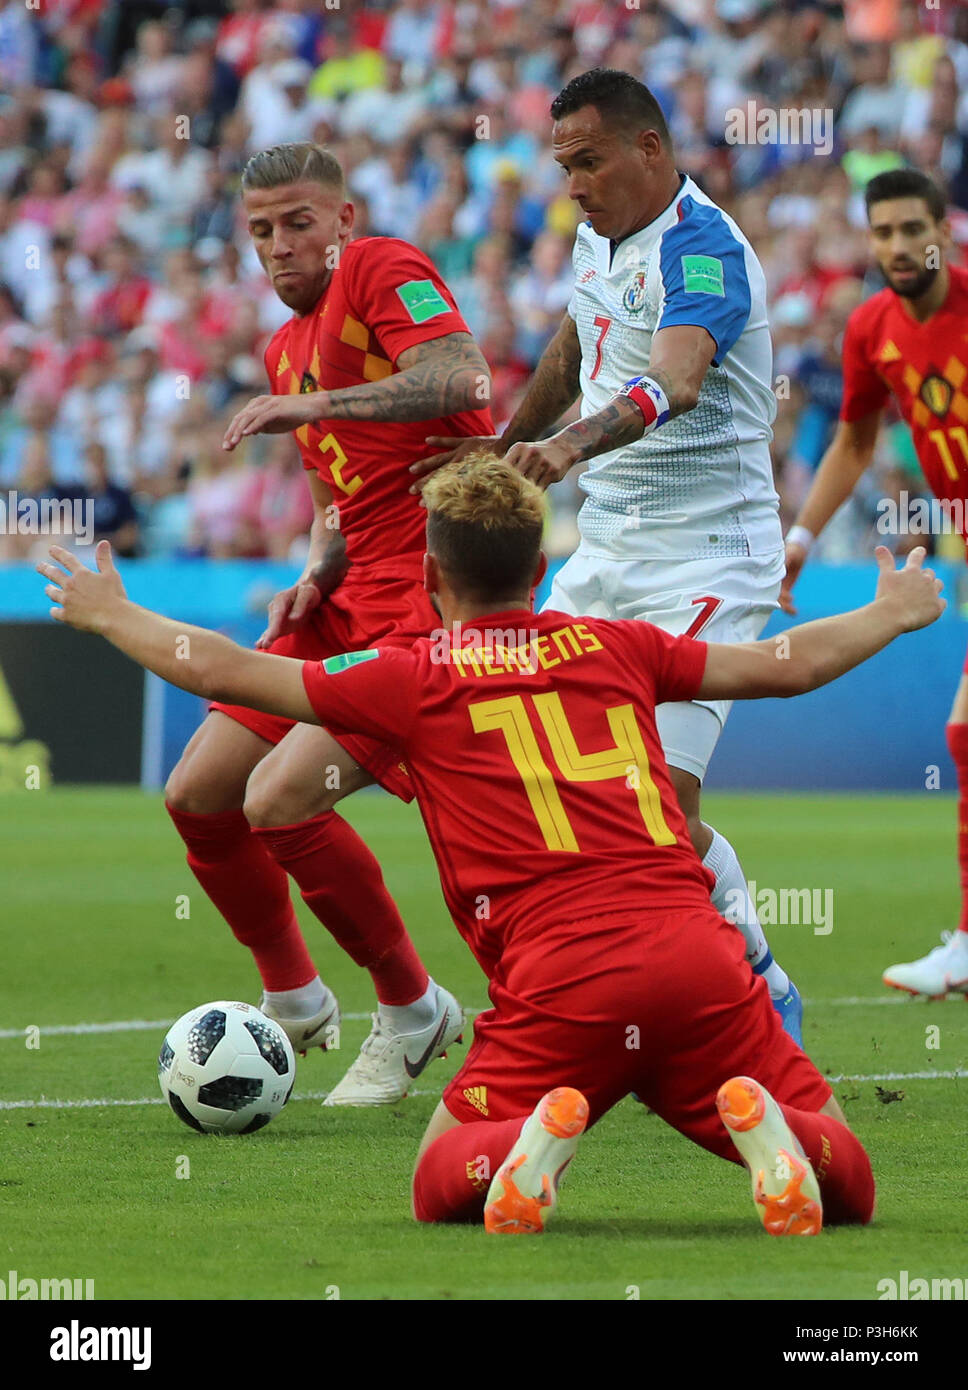 Sochi, Russia. 18th June, 2018. Toby Alderweireld (L top) of Belgium vies with Blas Perez (R top) of Panama during a group G match between Belgium and Panama at the 2018 FIFA World Cup in Sochi, Russia, June 18, 2018. Credit: Bai Xueqi/Xinhua/Alamy Live News Stock Photo